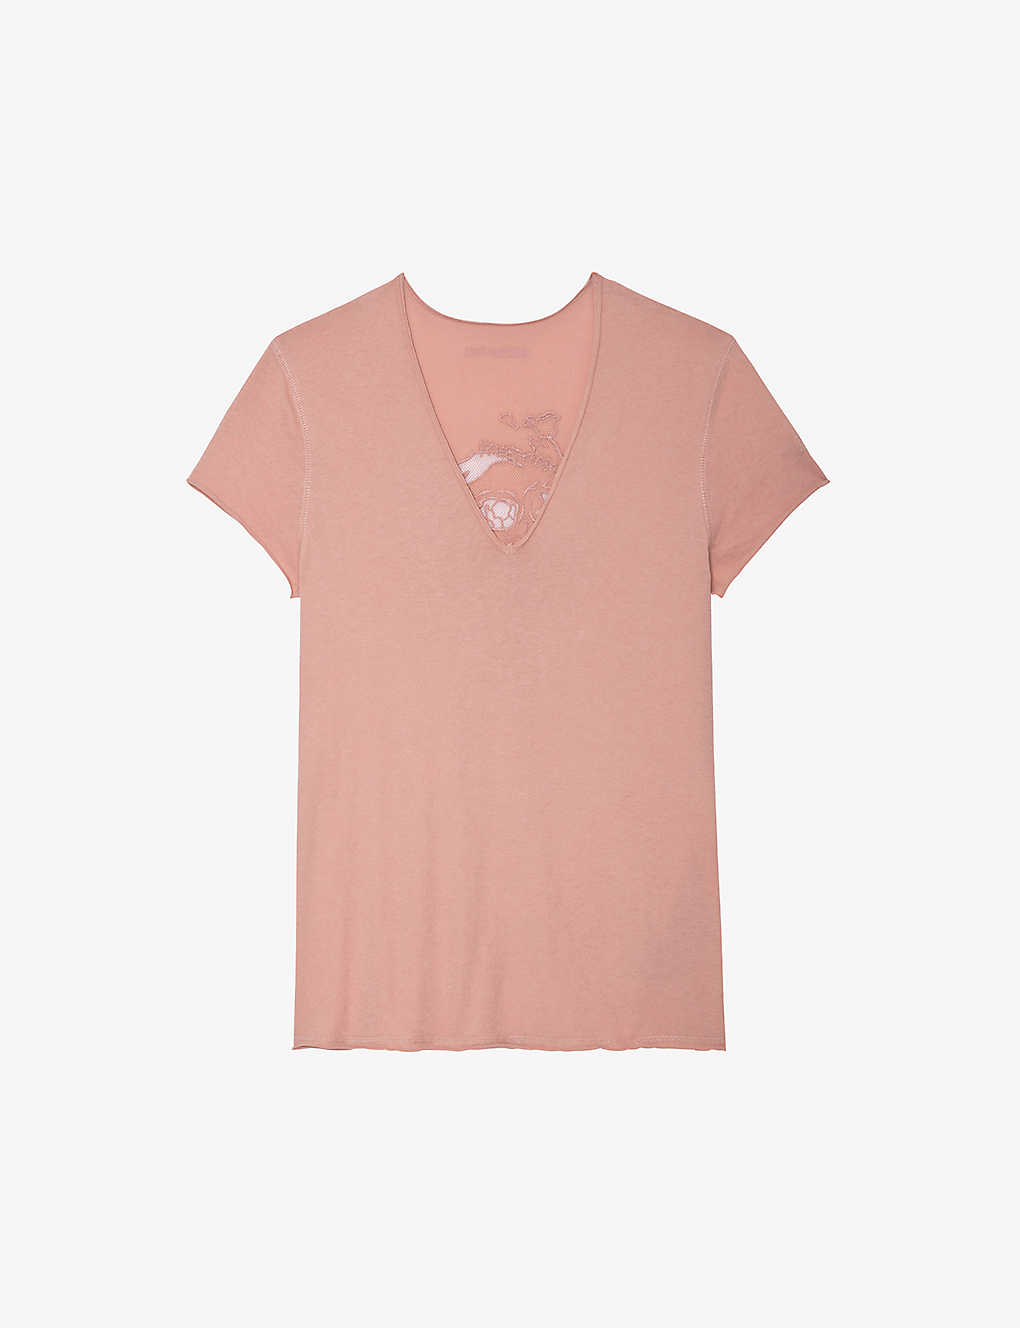 ZADIG & VOLTAIRE ZADIG&VOLTAIRE WOMENS TEA ROSE STORY V-NECK FISHNET-PATTERN ORGANIC-COTTON T-SHIRT